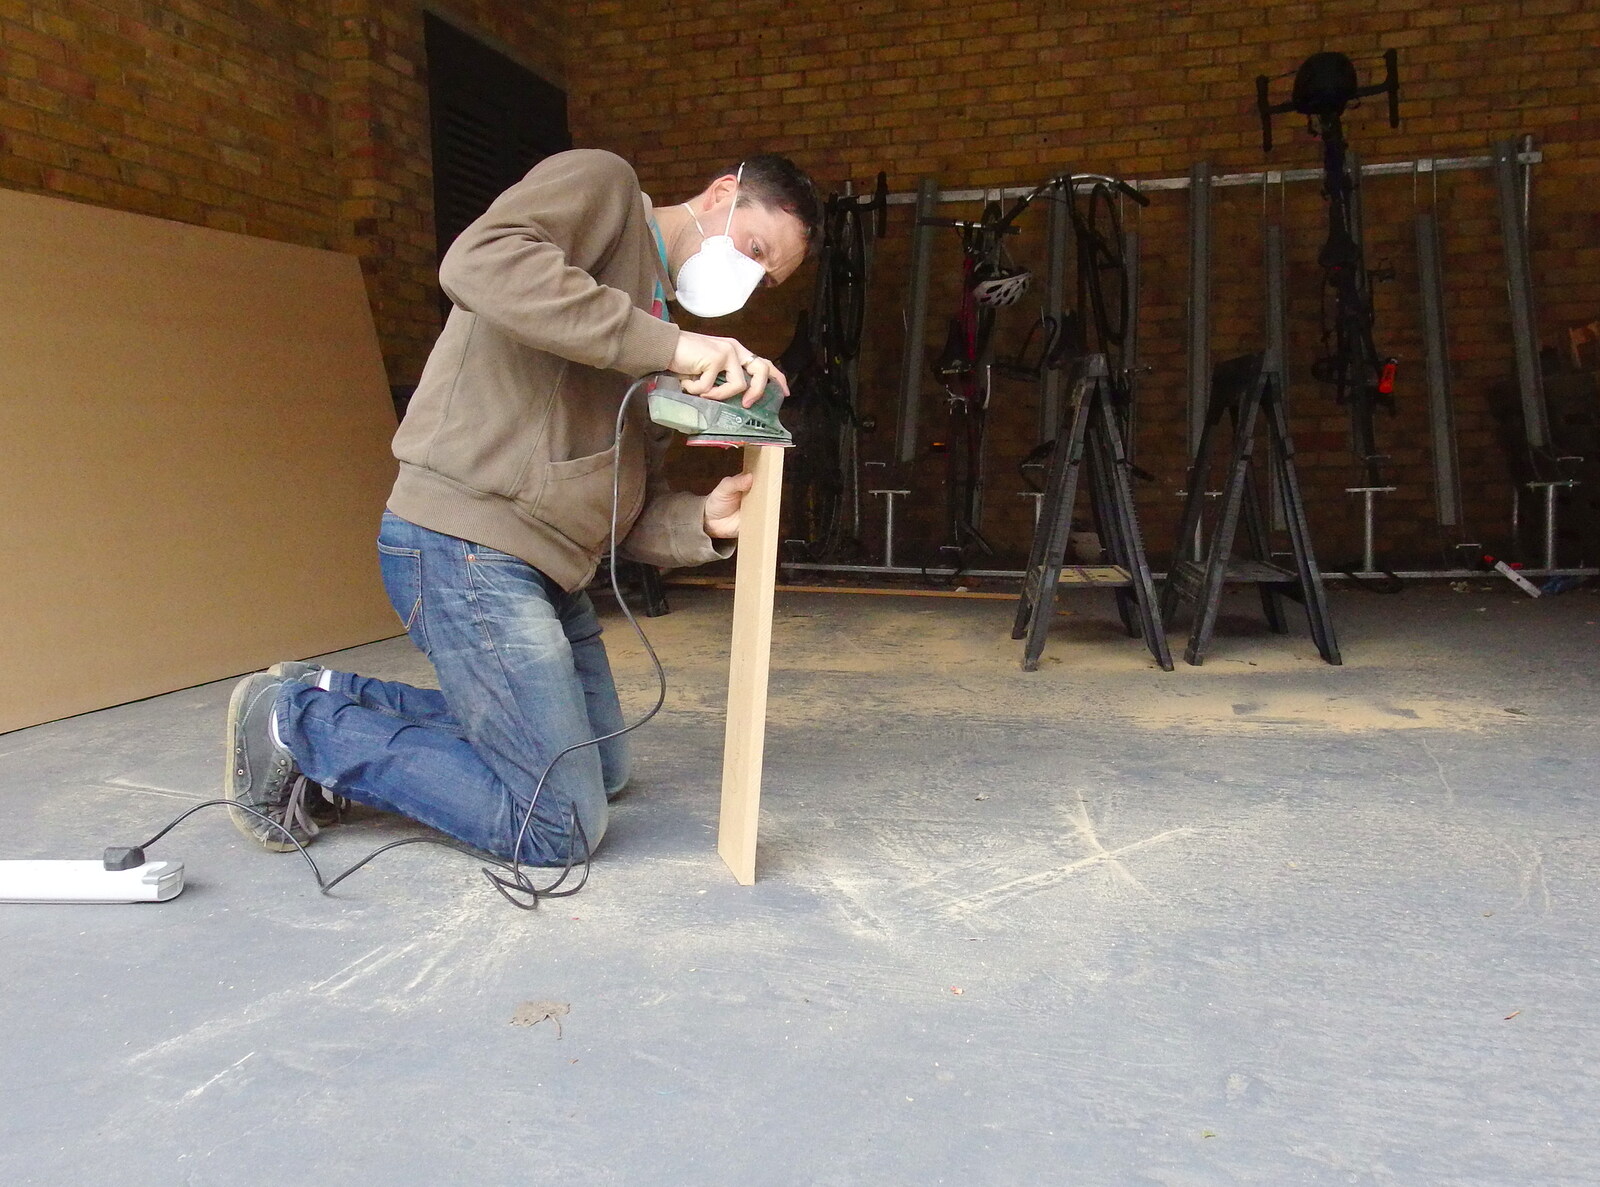 SwiftKey's Arcade Cabinet, and the Streets of Southwark, London - 5th December 2013: Emlyn does some sanding